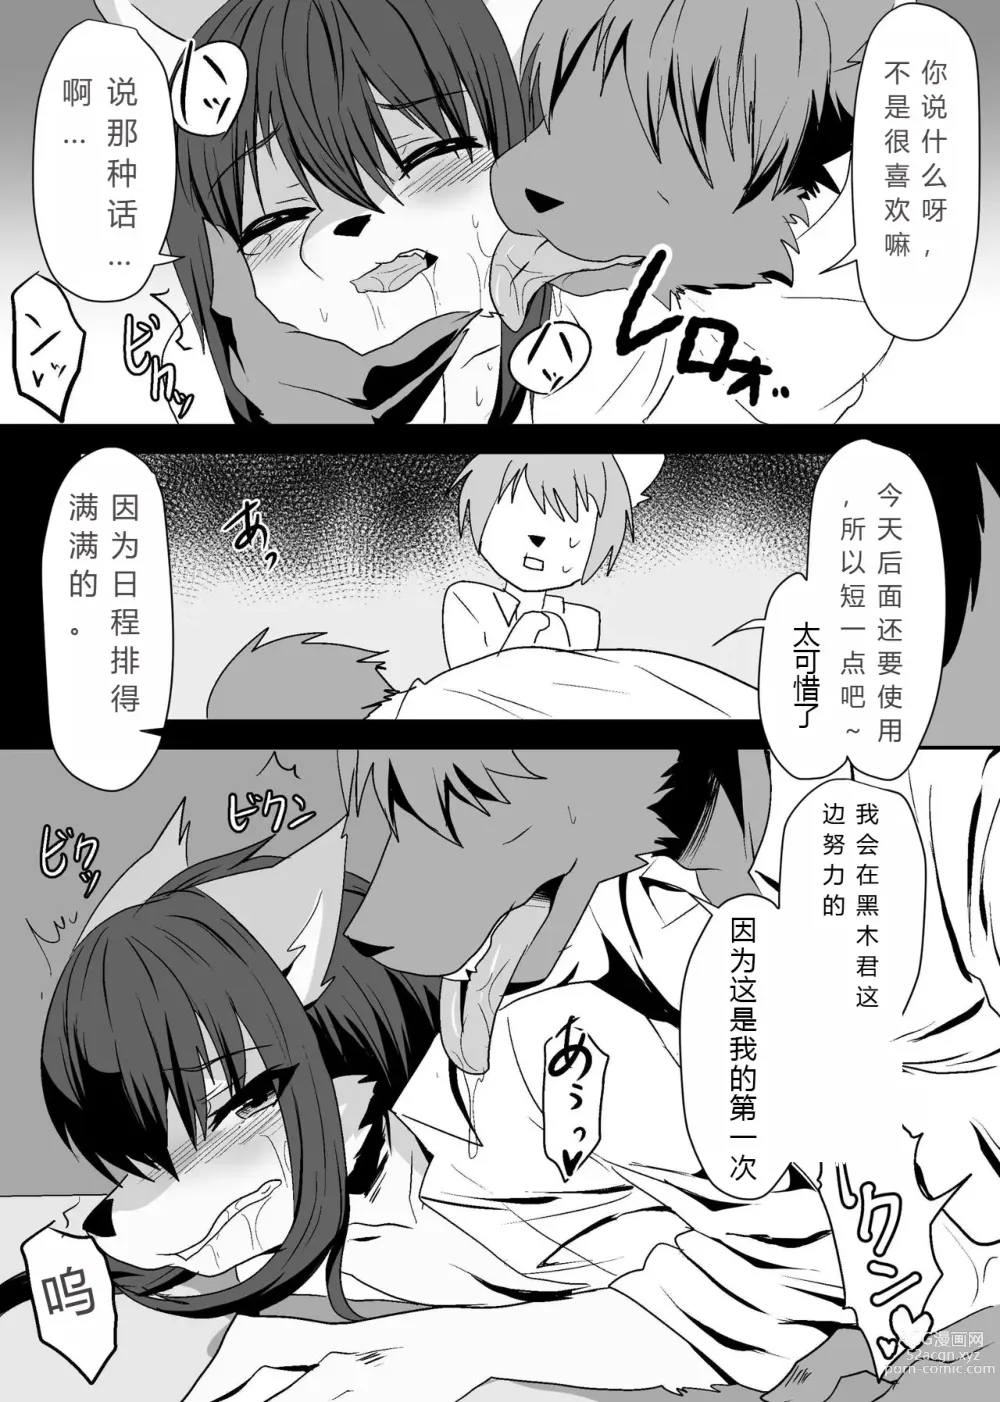 Page 6 of doujinshi 我们要上班吗？